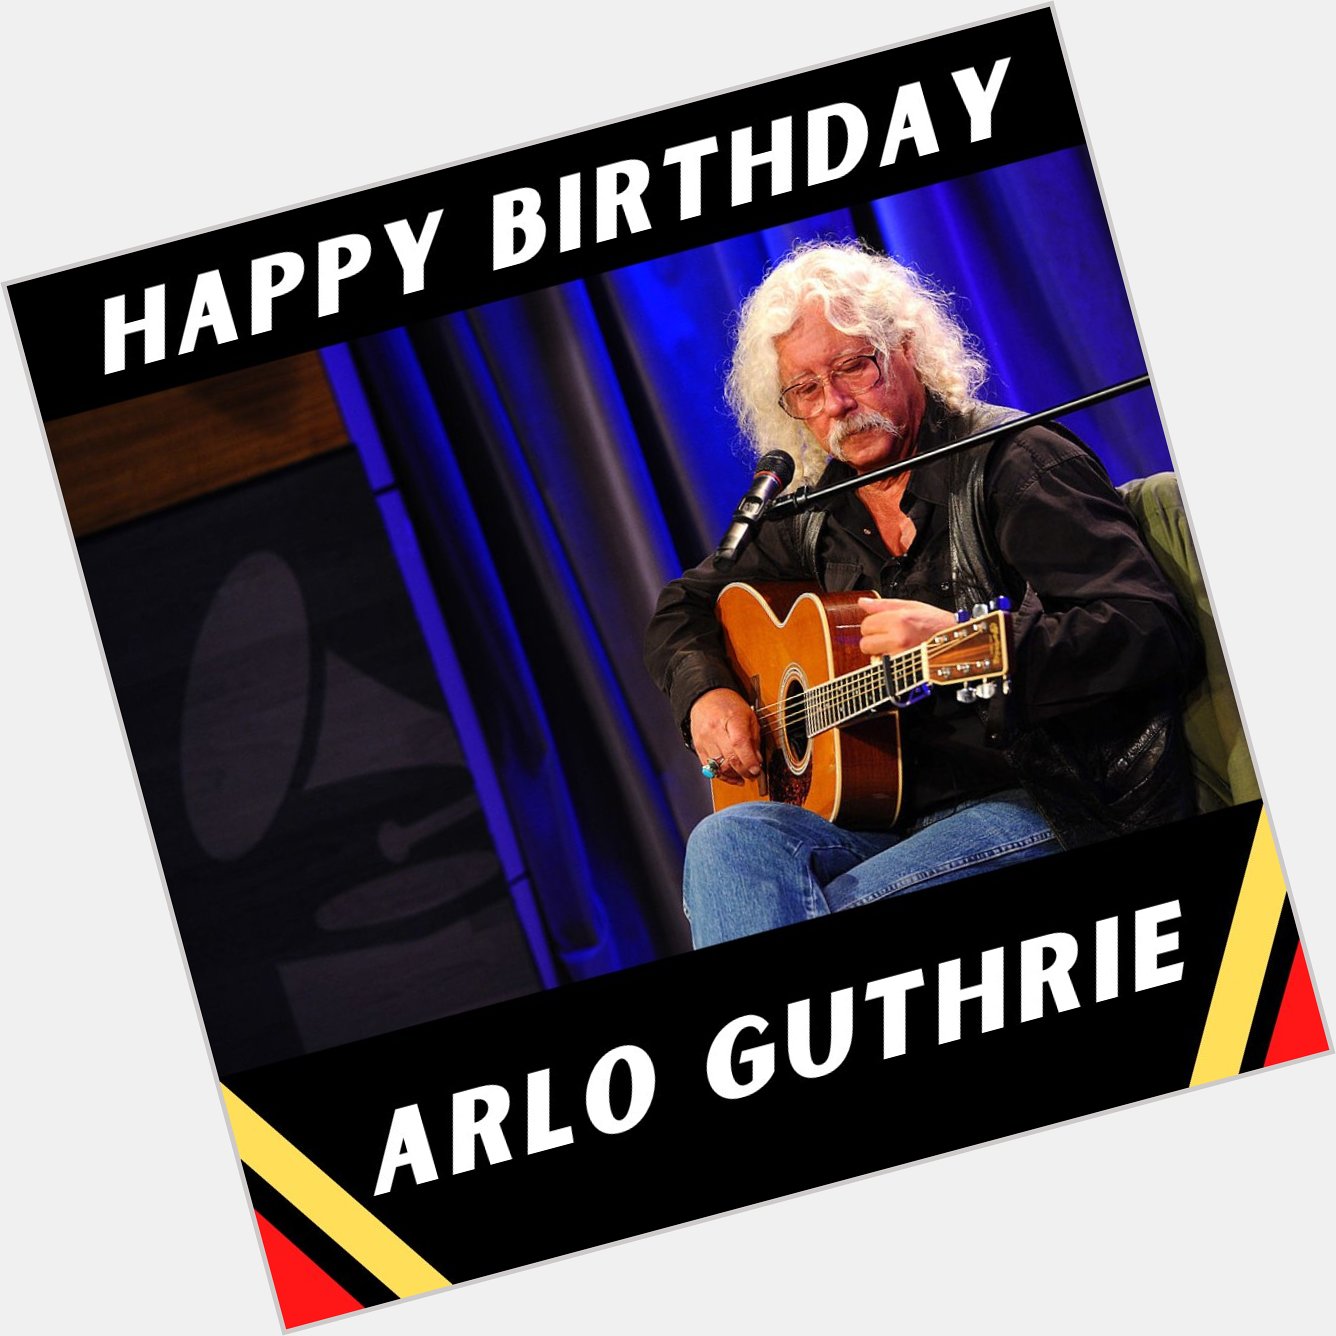 Wishing a happy birthday to timeless storyteller and Arlo Guthrie Michael Buckner/Getty Images 